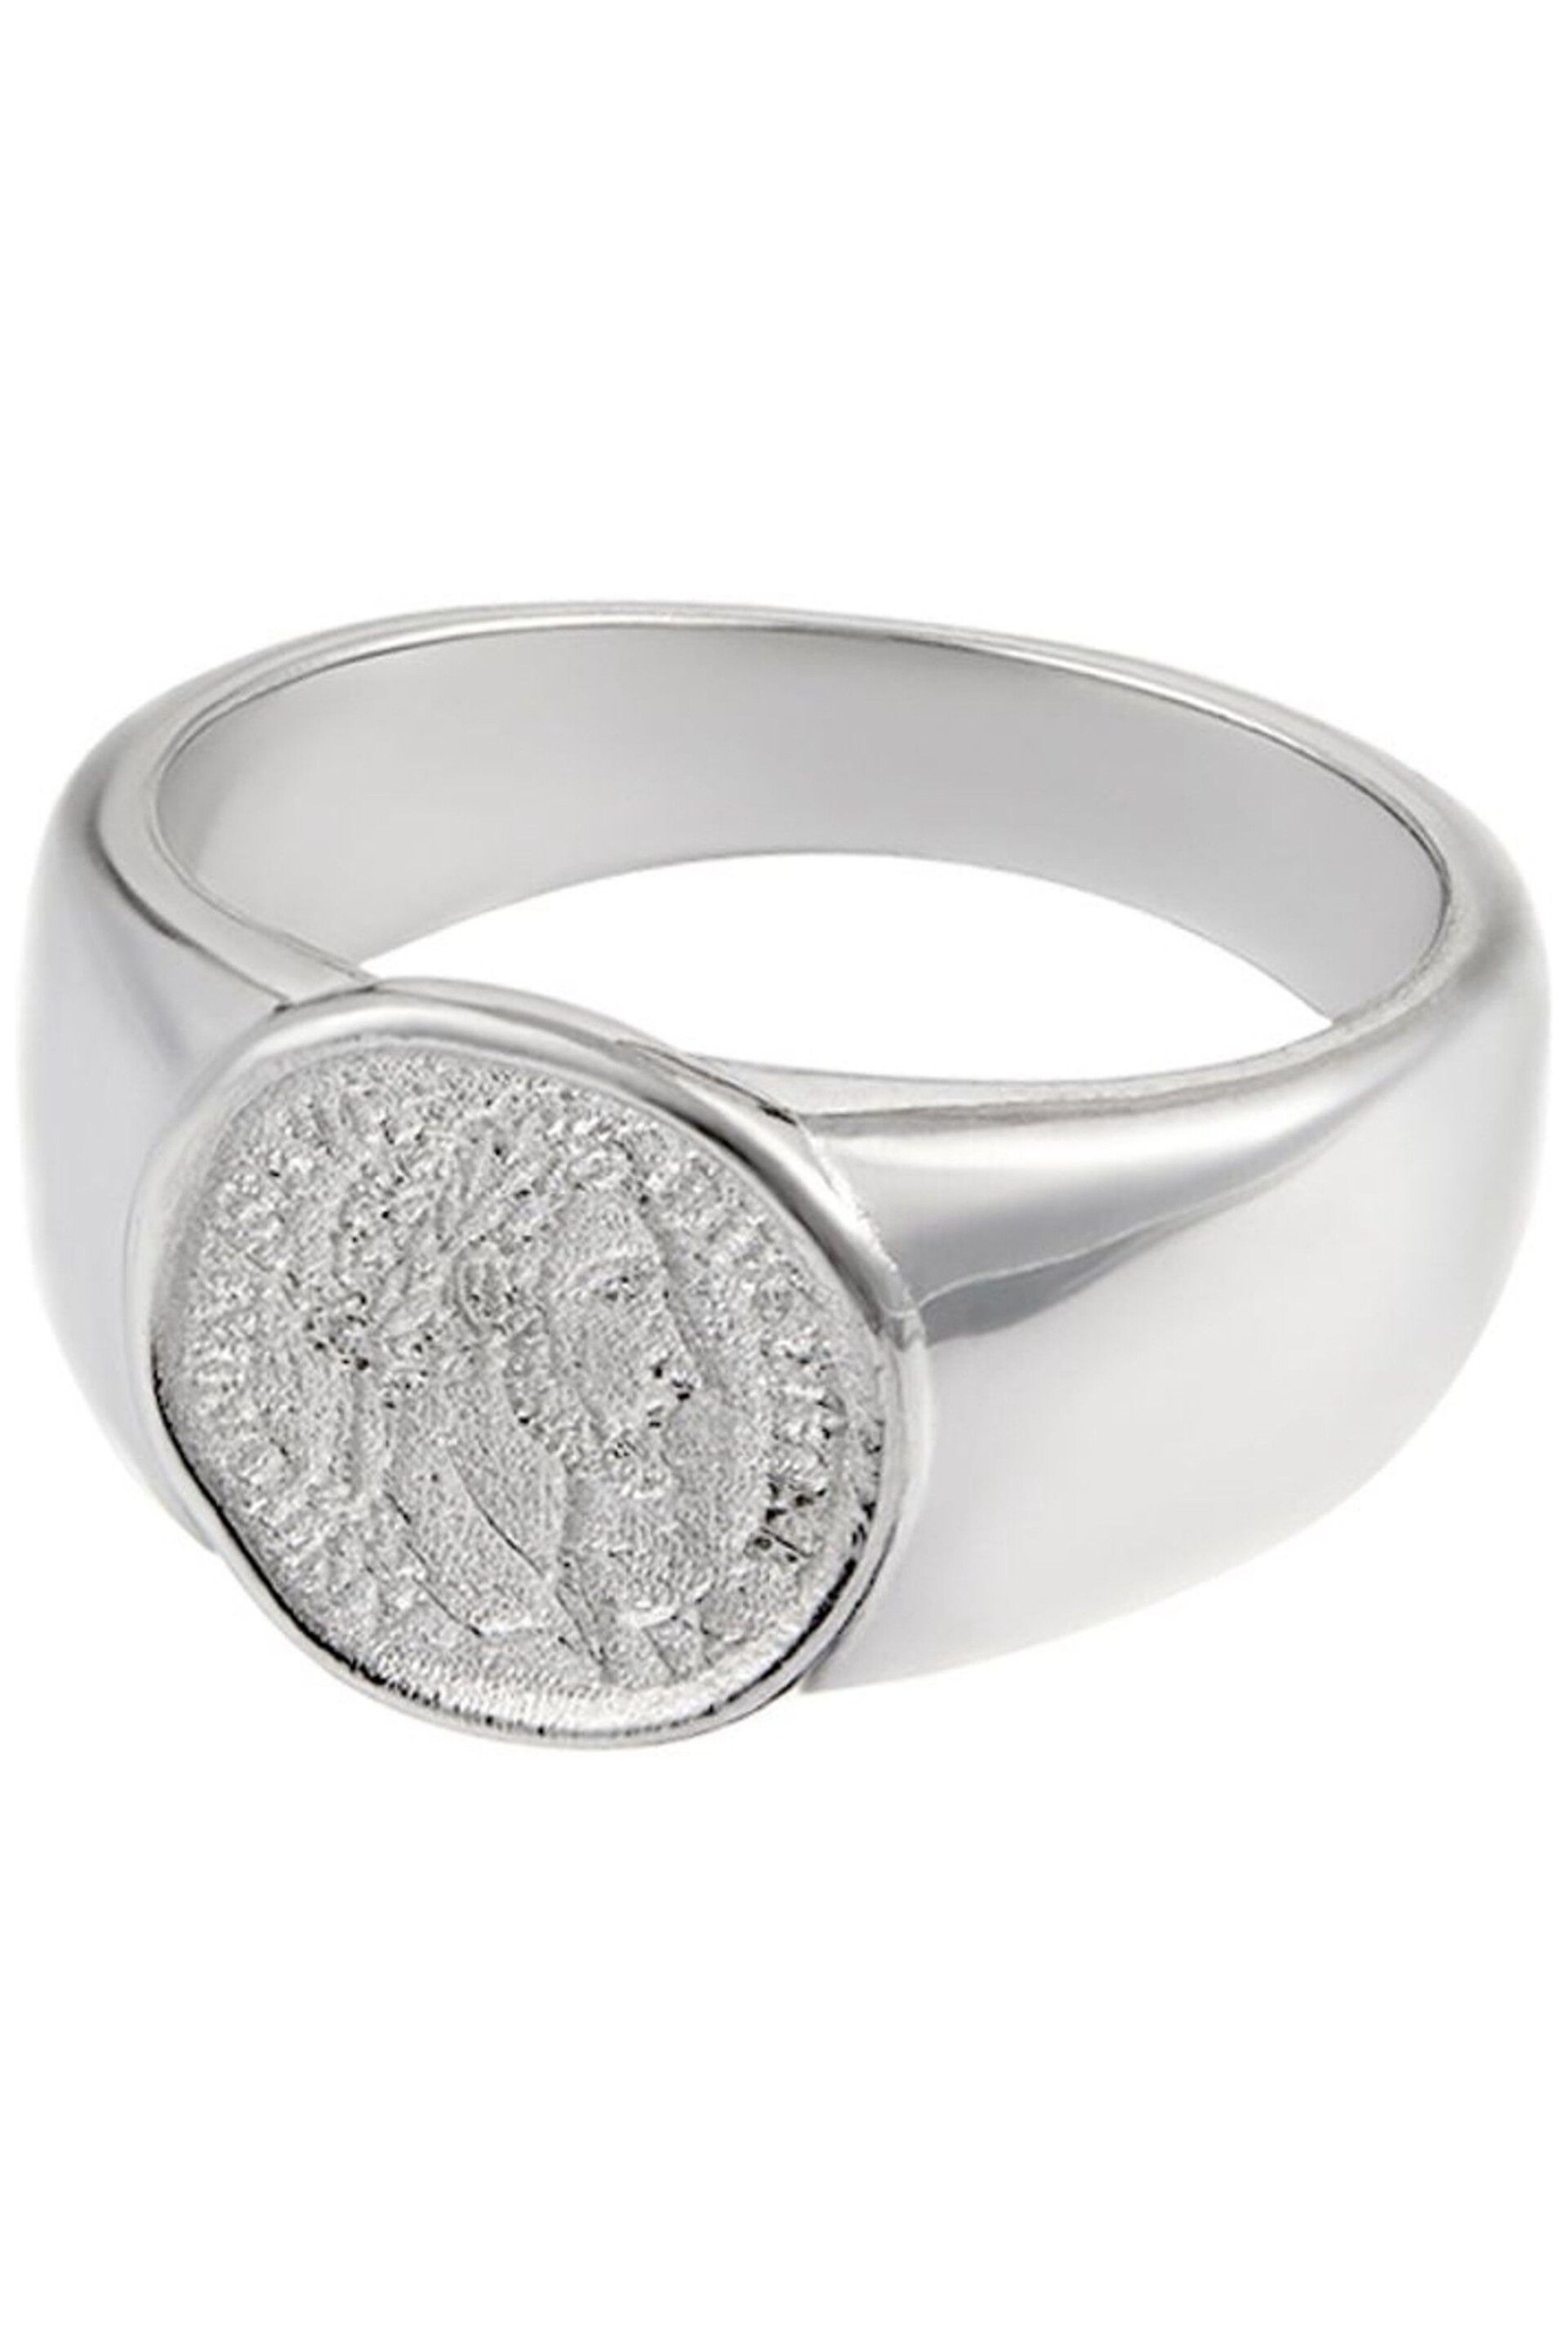 Orelia & Joe Silver Plated Coin Sovereign Signet Ring - Image 1 of 1